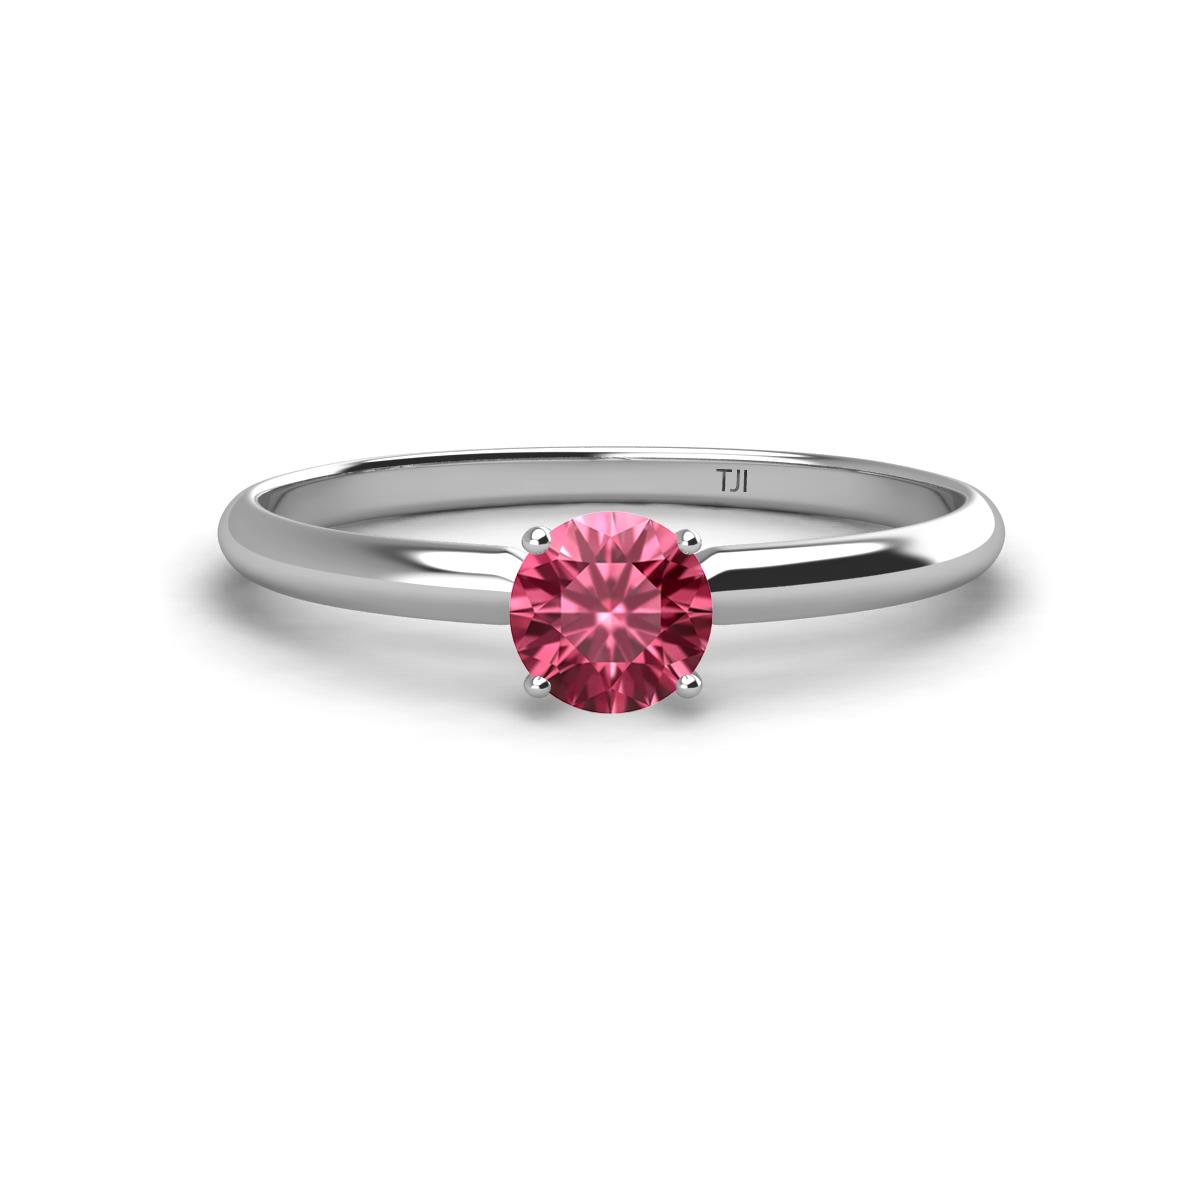 Solus Round Pink Tourmaline Solitaire Engagement Ring Round Pink Tourmaline ct Womens Solitaire Engagement Ring K White Gold